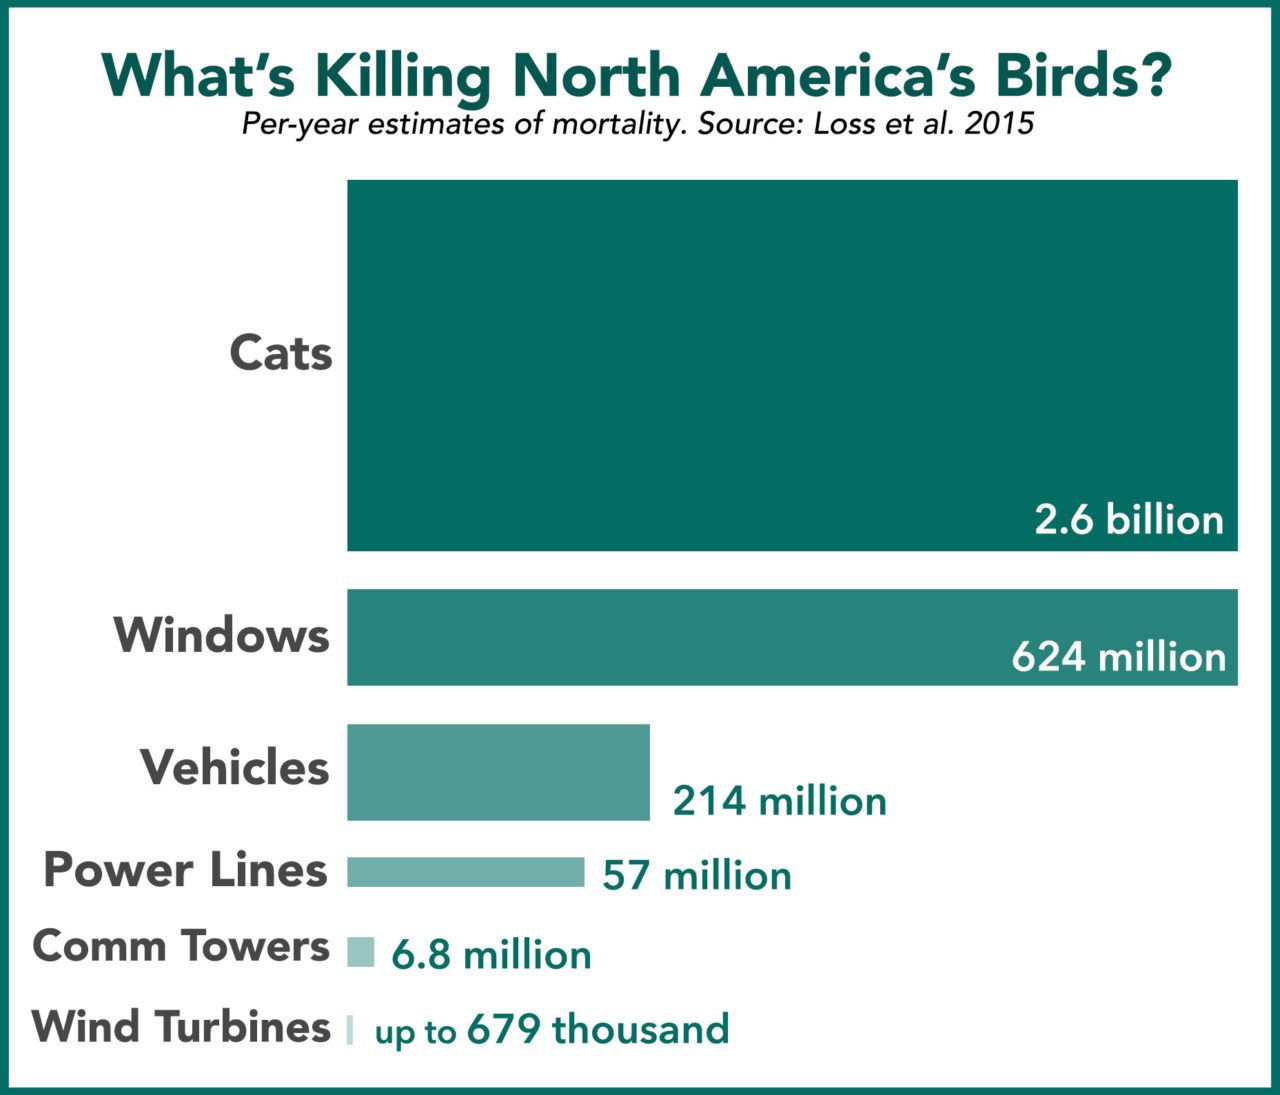 Estimates of annual bird deaths from specific human-related causes (other than habitat loss) in the United States and Canada. Source: Loss et al. 2015.